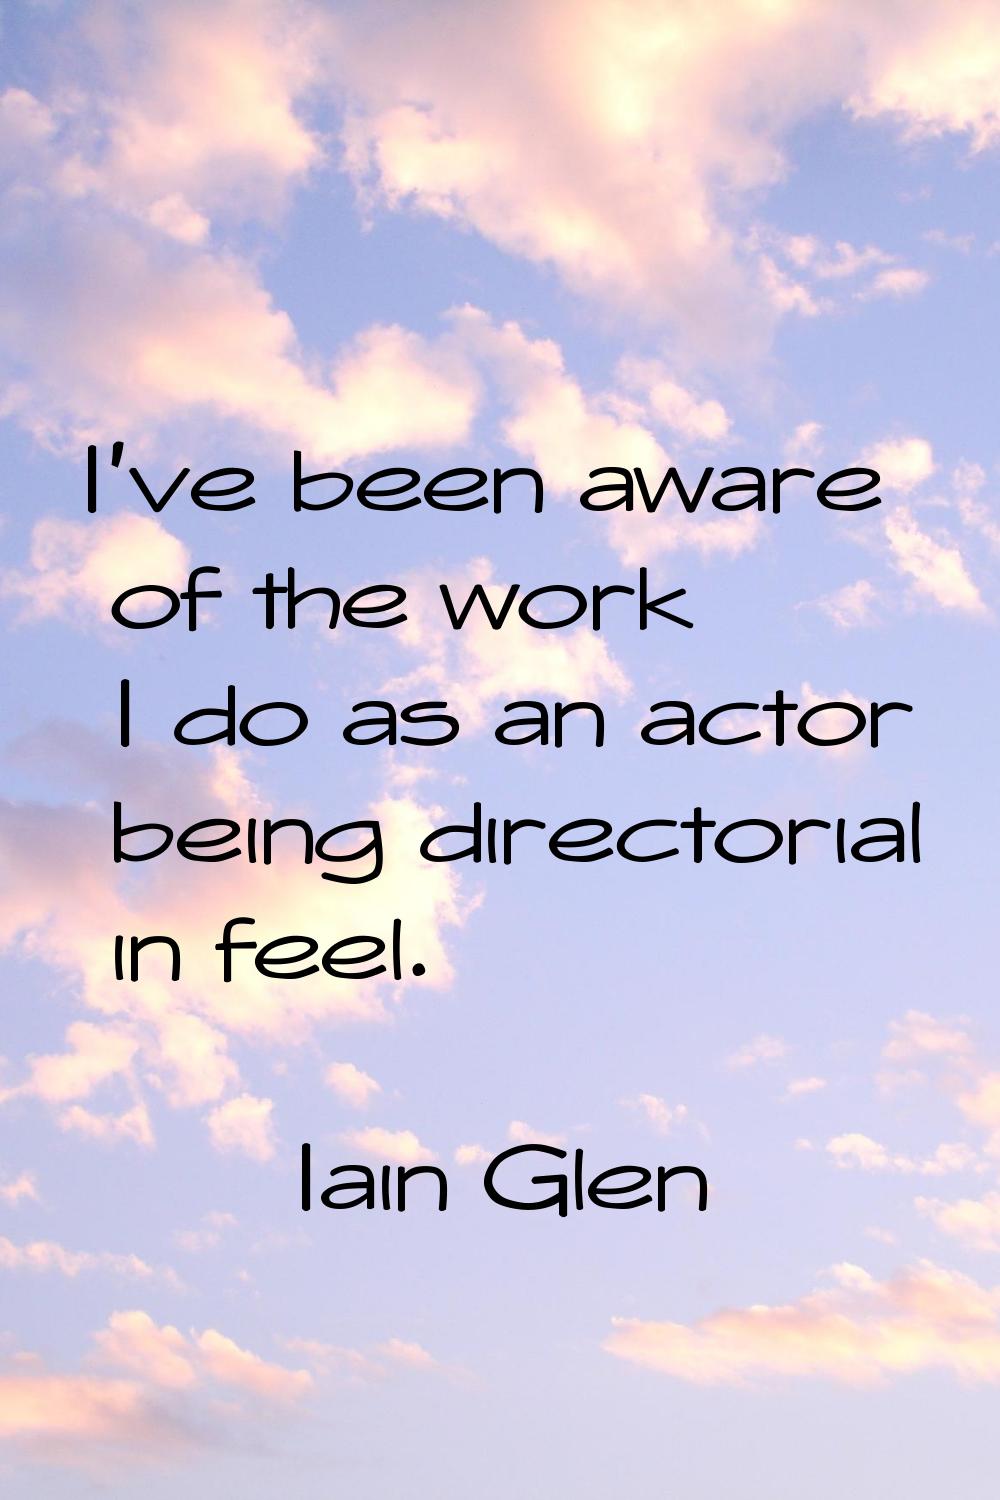 I've been aware of the work I do as an actor being directorial in feel.